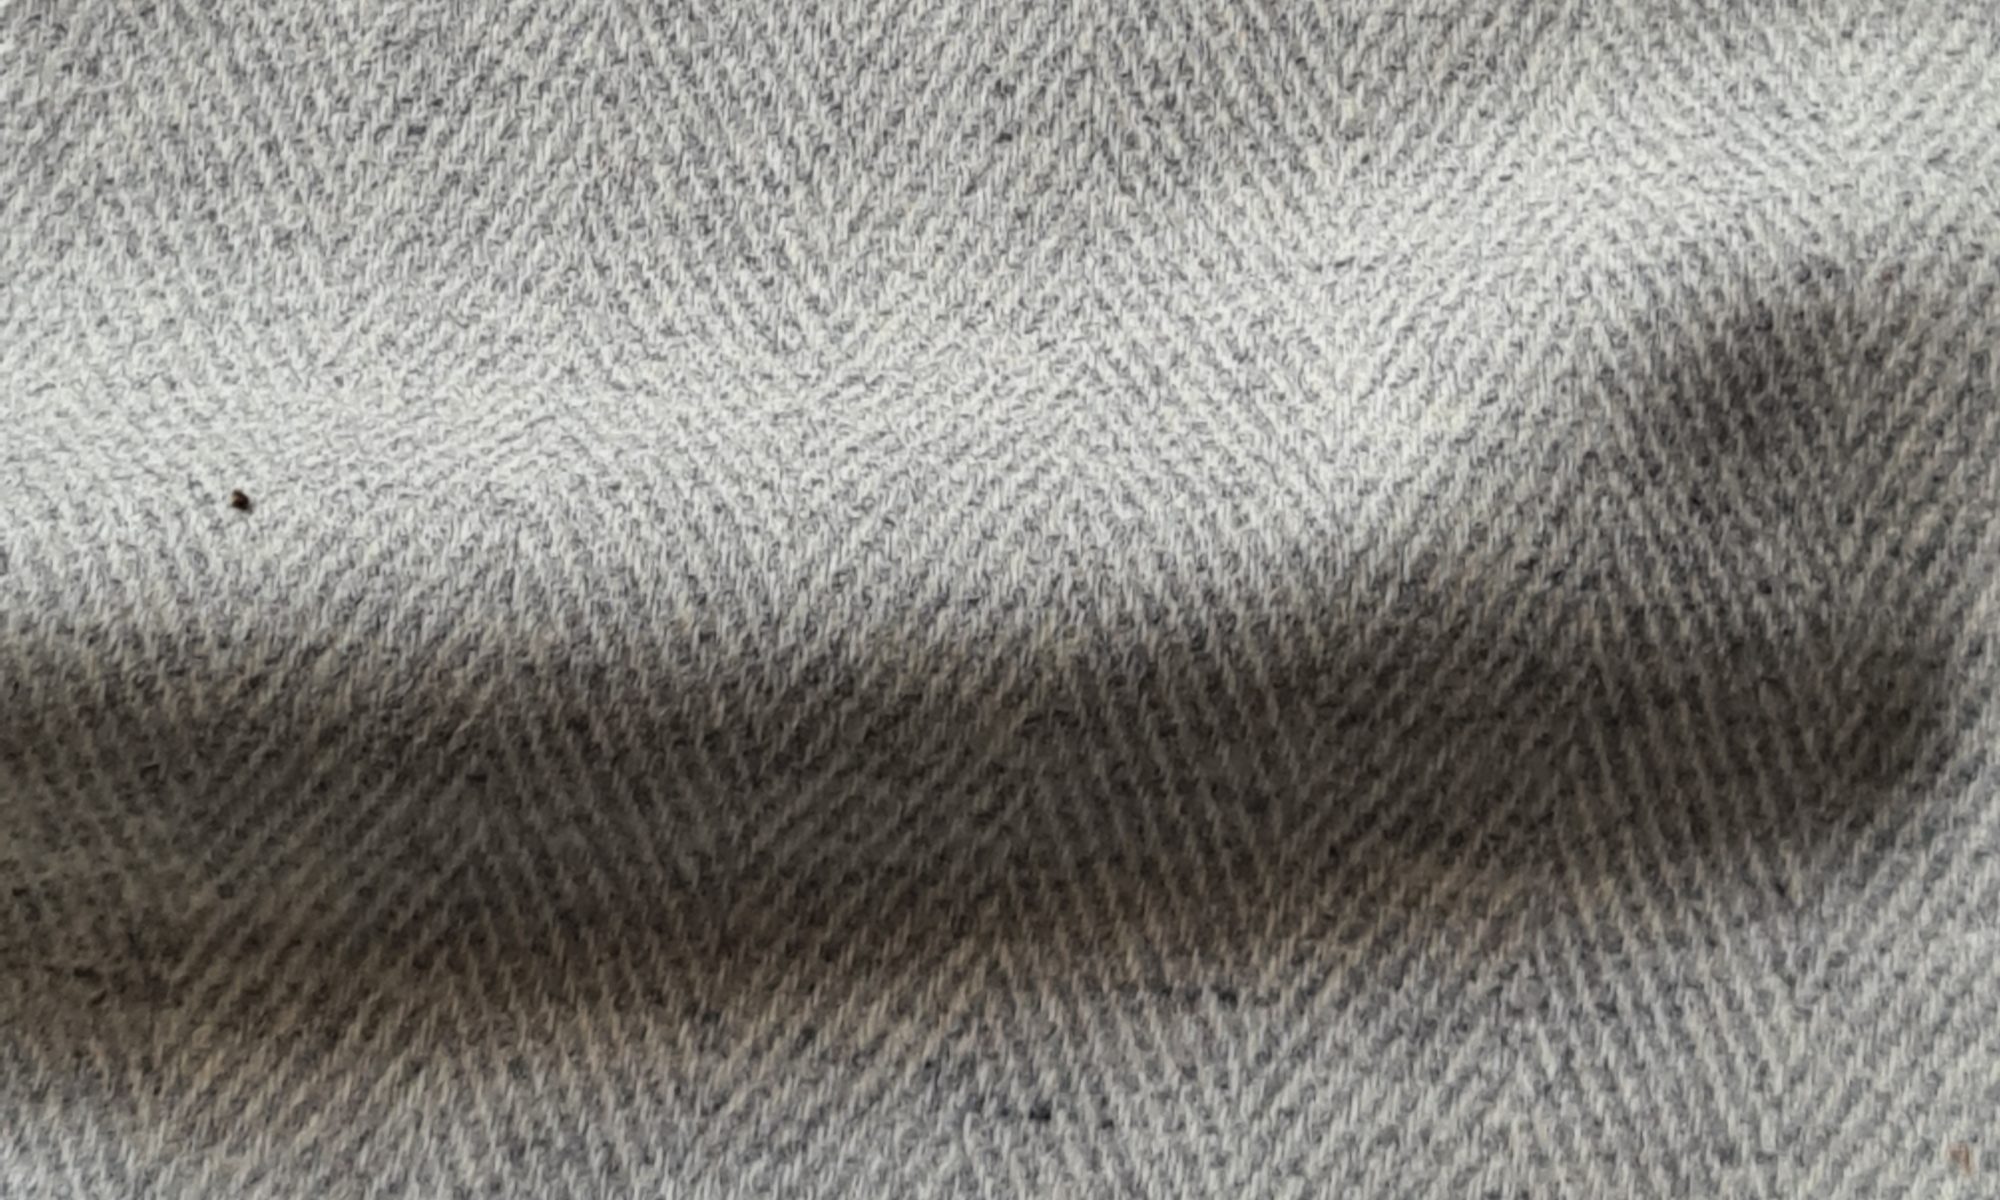 7591 light grey herringbone chevron jacket fabric WIDTH cm141 WEIGHT gr340 - gr241 square meter - COMPOSITION 70 wool 20 polyammide 10 cashmere - 350mts